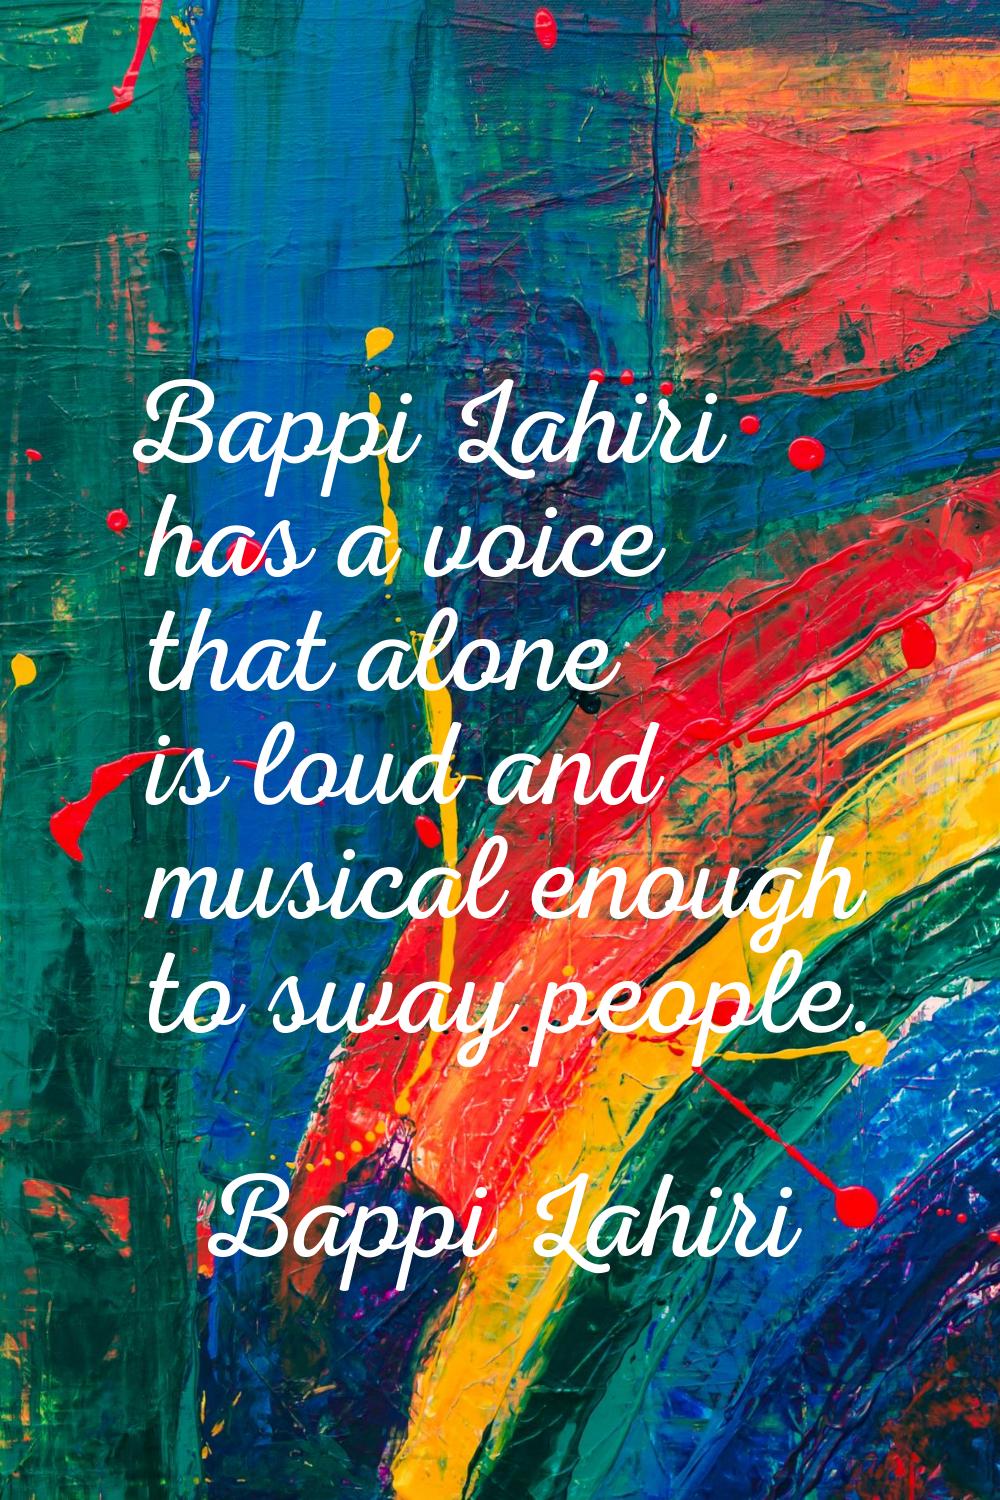 Bappi Lahiri has a voice that alone is loud and musical enough to sway people.